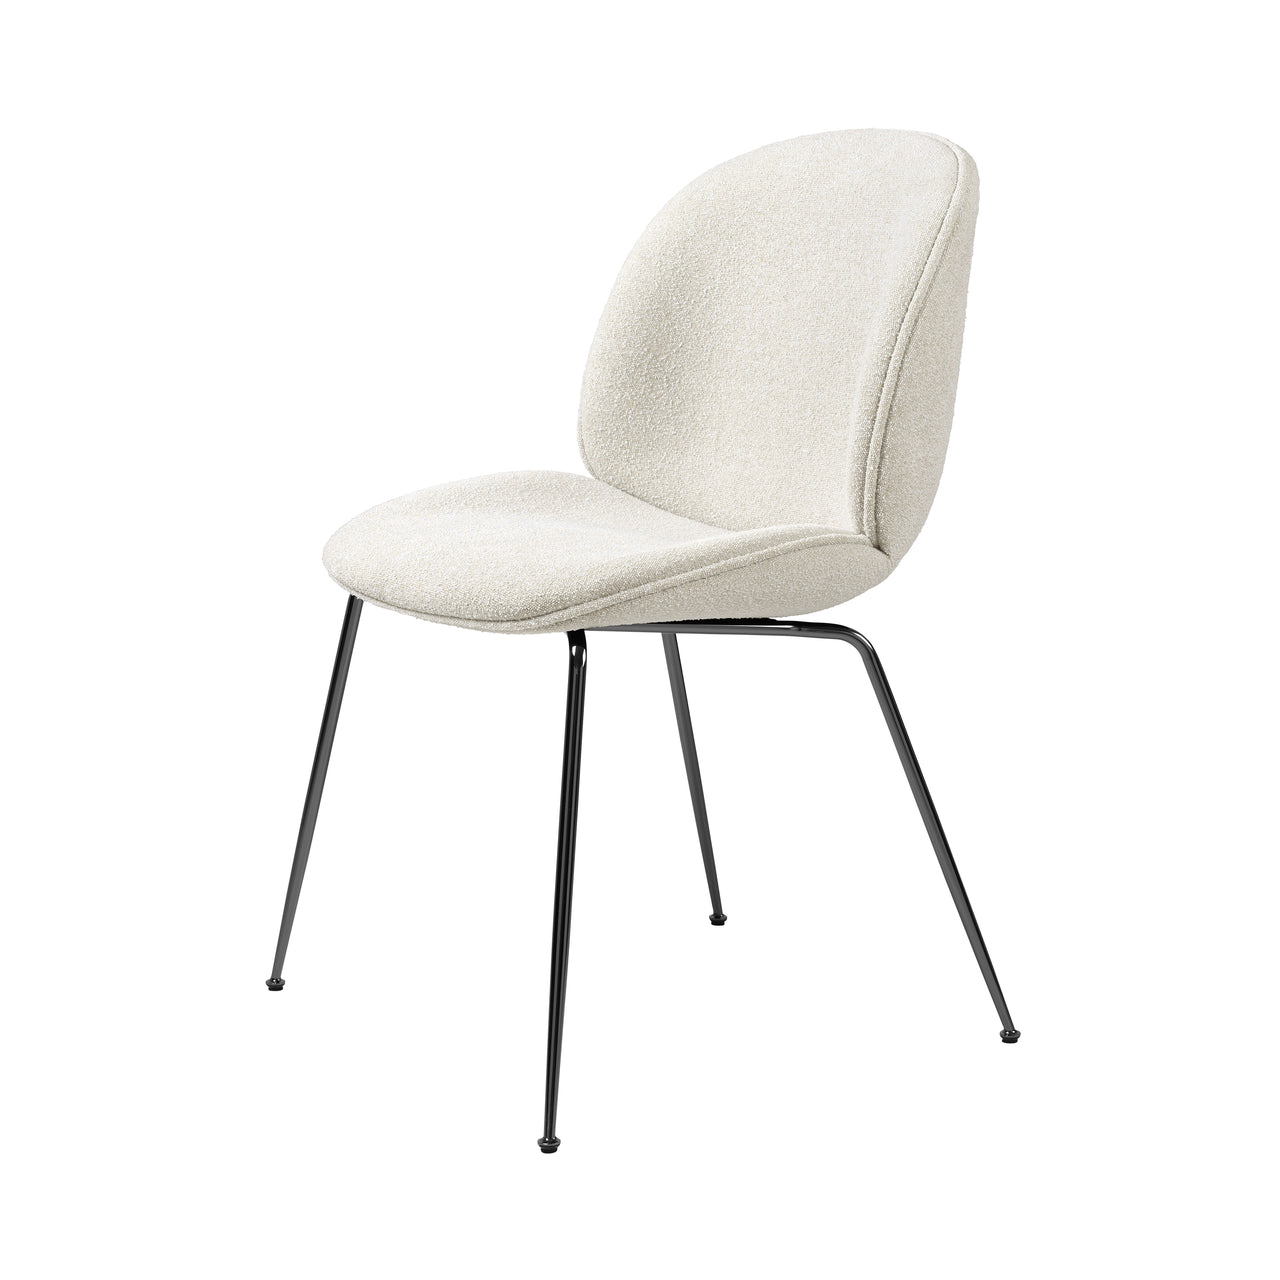 Beetle Dining Chair: Conic Base + Full Upholstery + Black Chrome